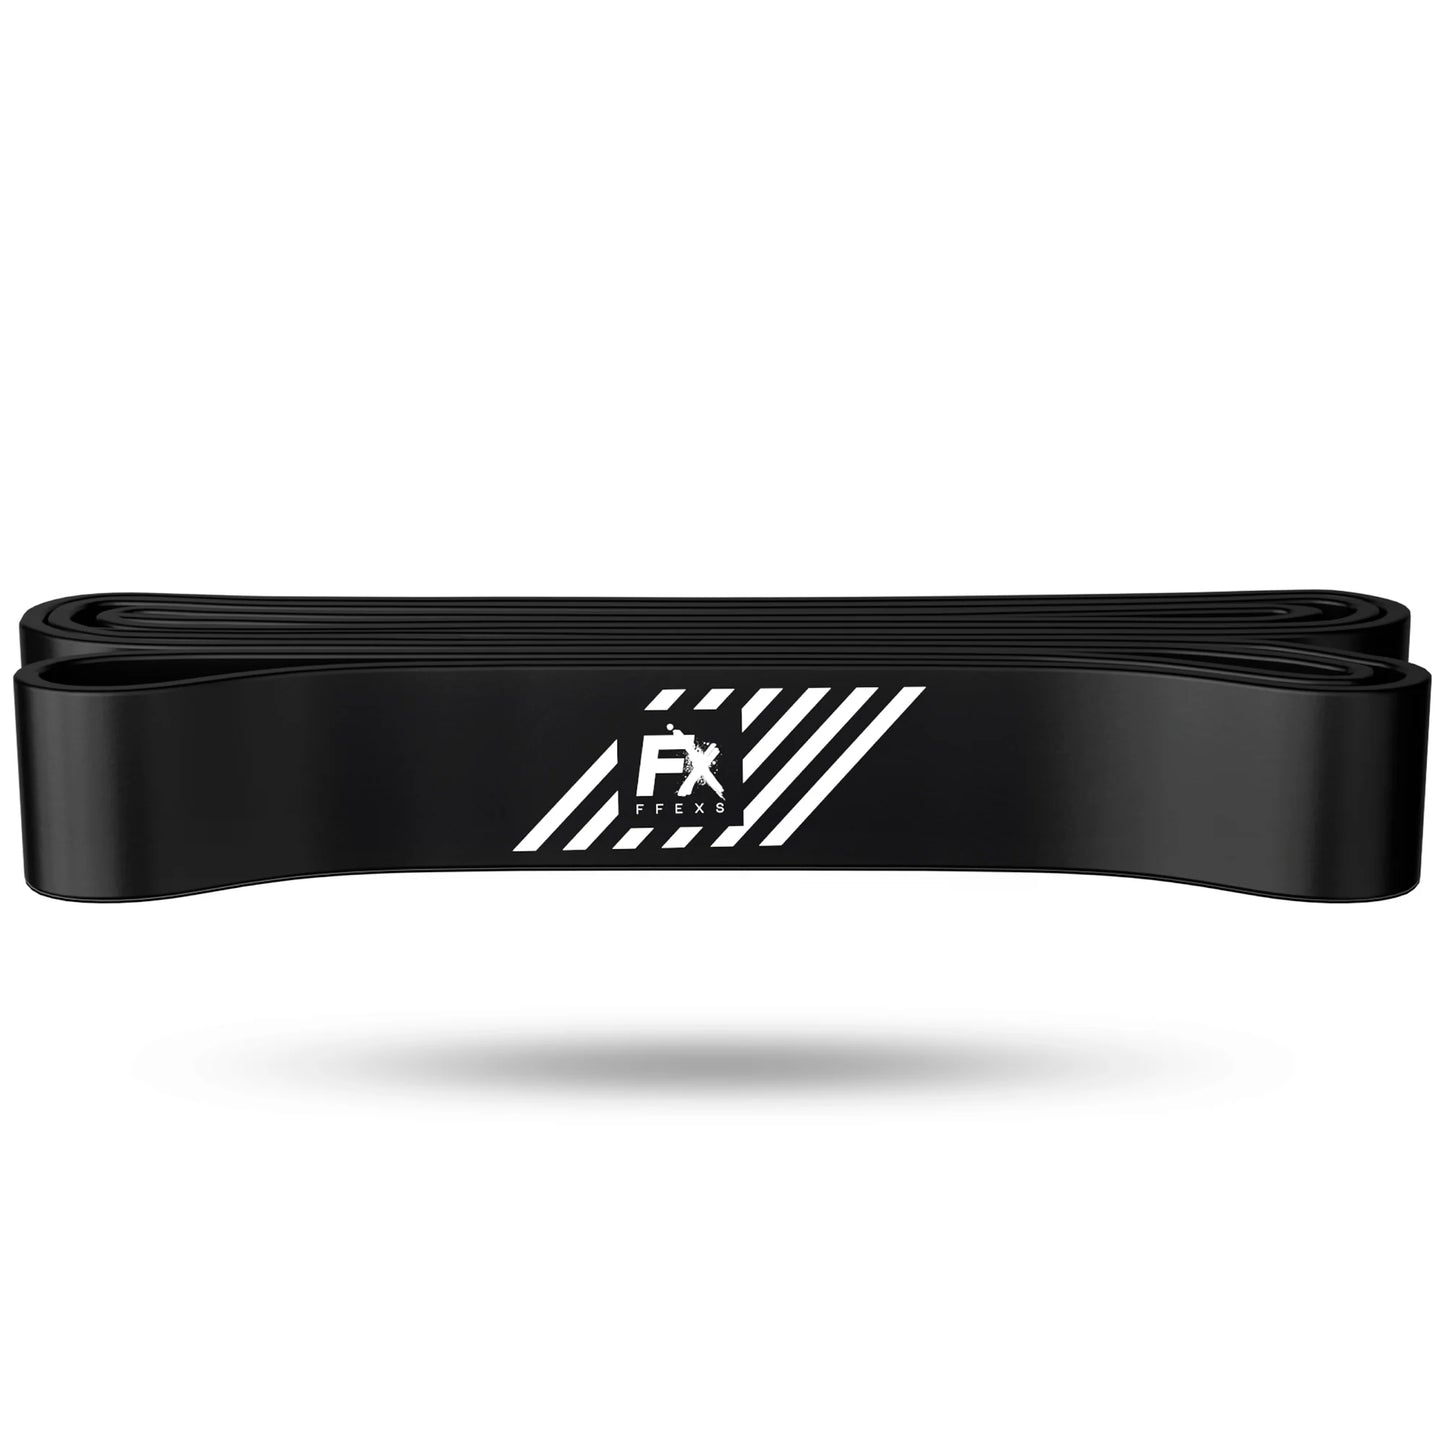 SINGLE FITNESS BANDS - Resistance Bands | FFEXS®